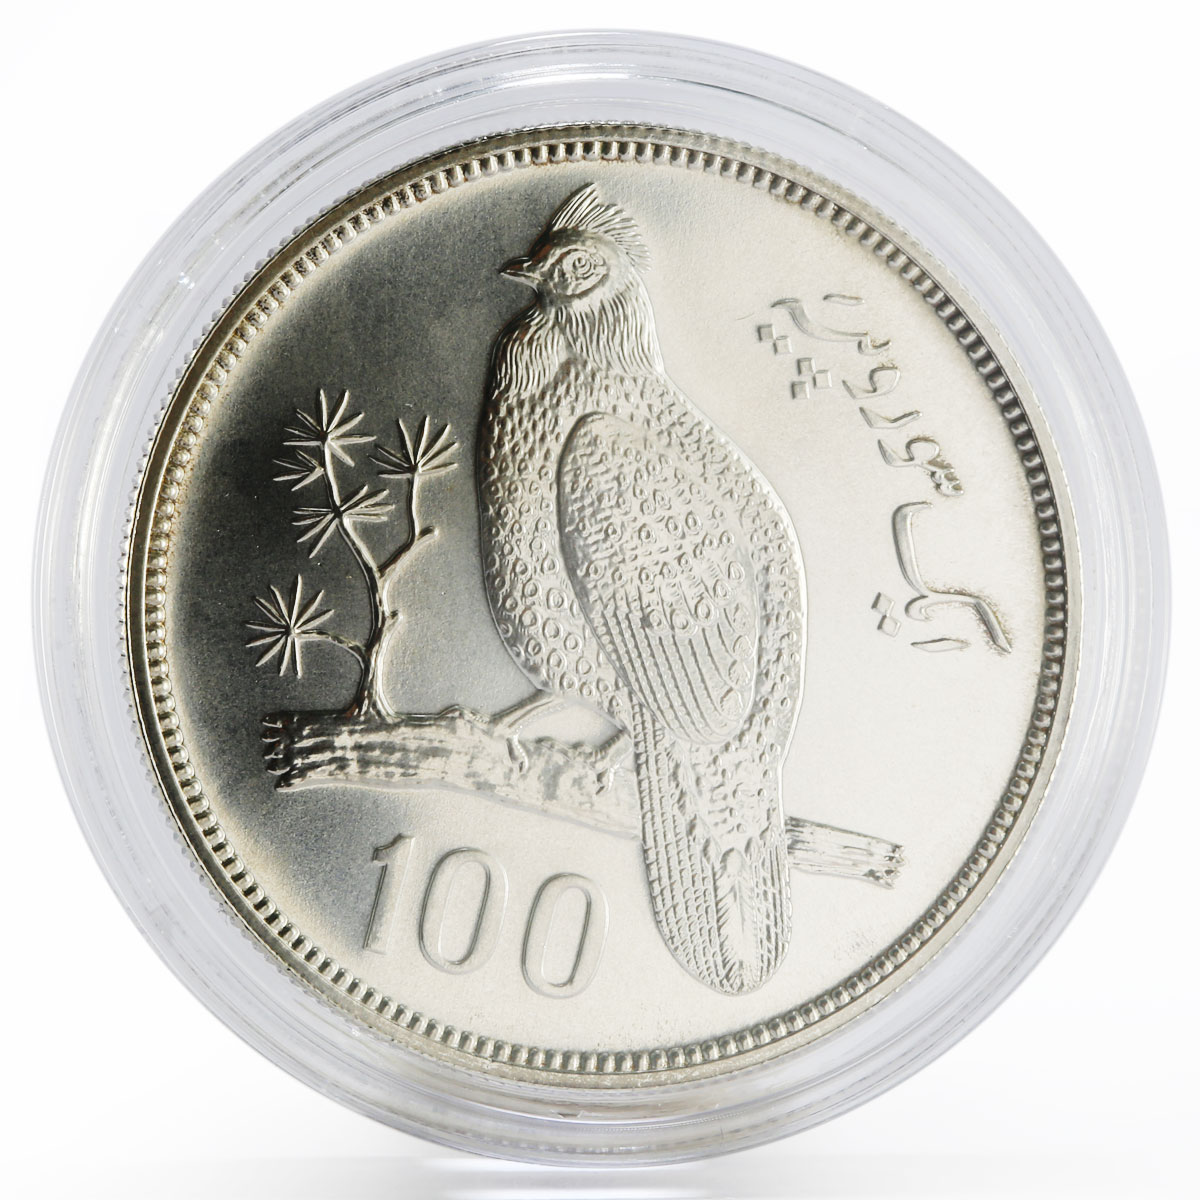 Pakistan 100 rupees Conservation series Tropogan Pheasant proof silver coin 1976